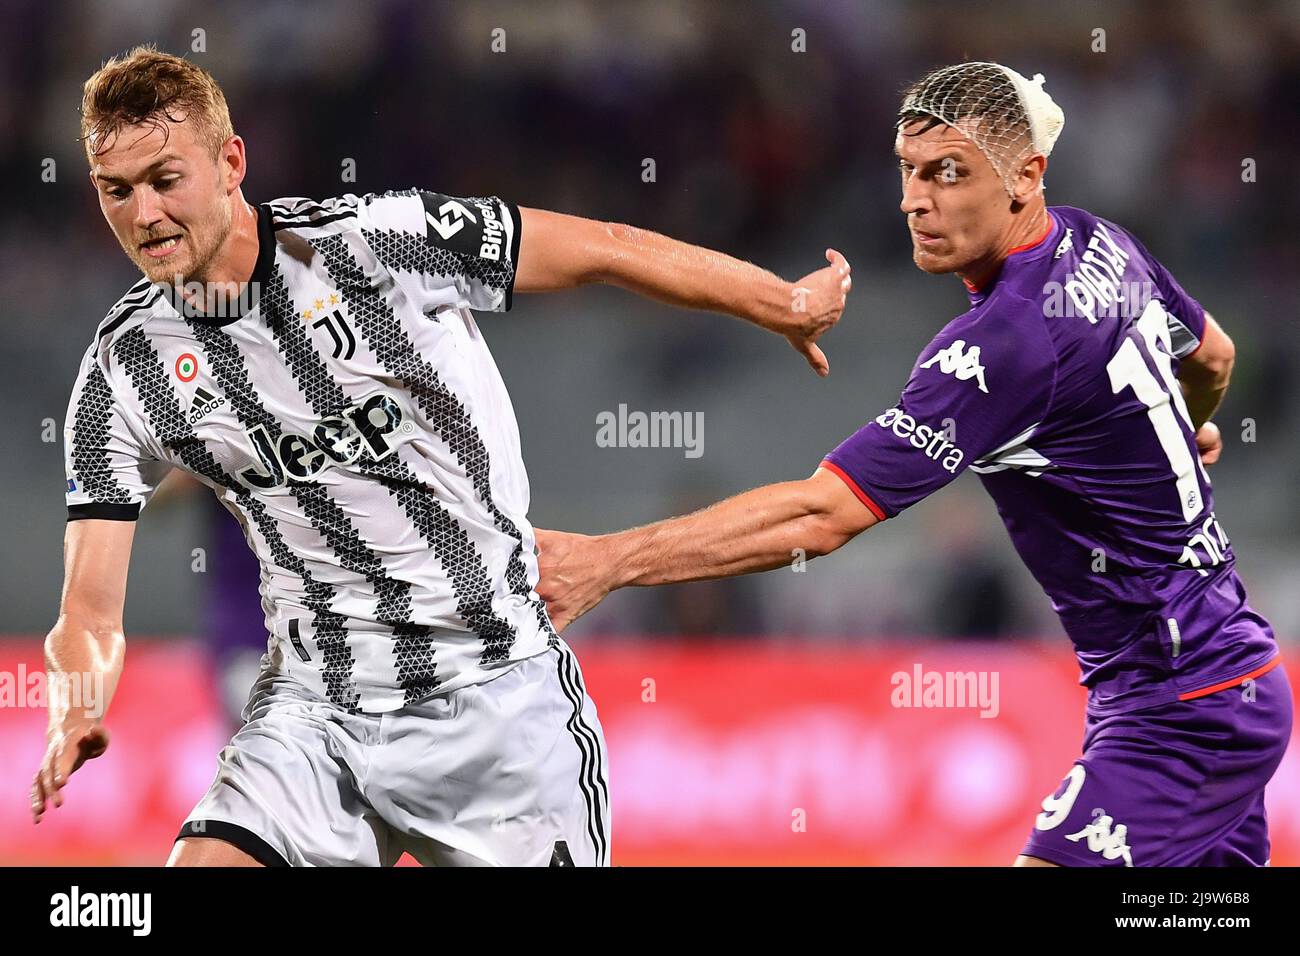 Florence, Italy. 21st May, 2022. Matthijs de Ligt (Juventus FC) and  Krzysztof Piatek (ACF Fiorentina) during ACF Fiorentina vs Juventus FC,  italian soccer Serie A match in Florence, Italy, May 21 2022